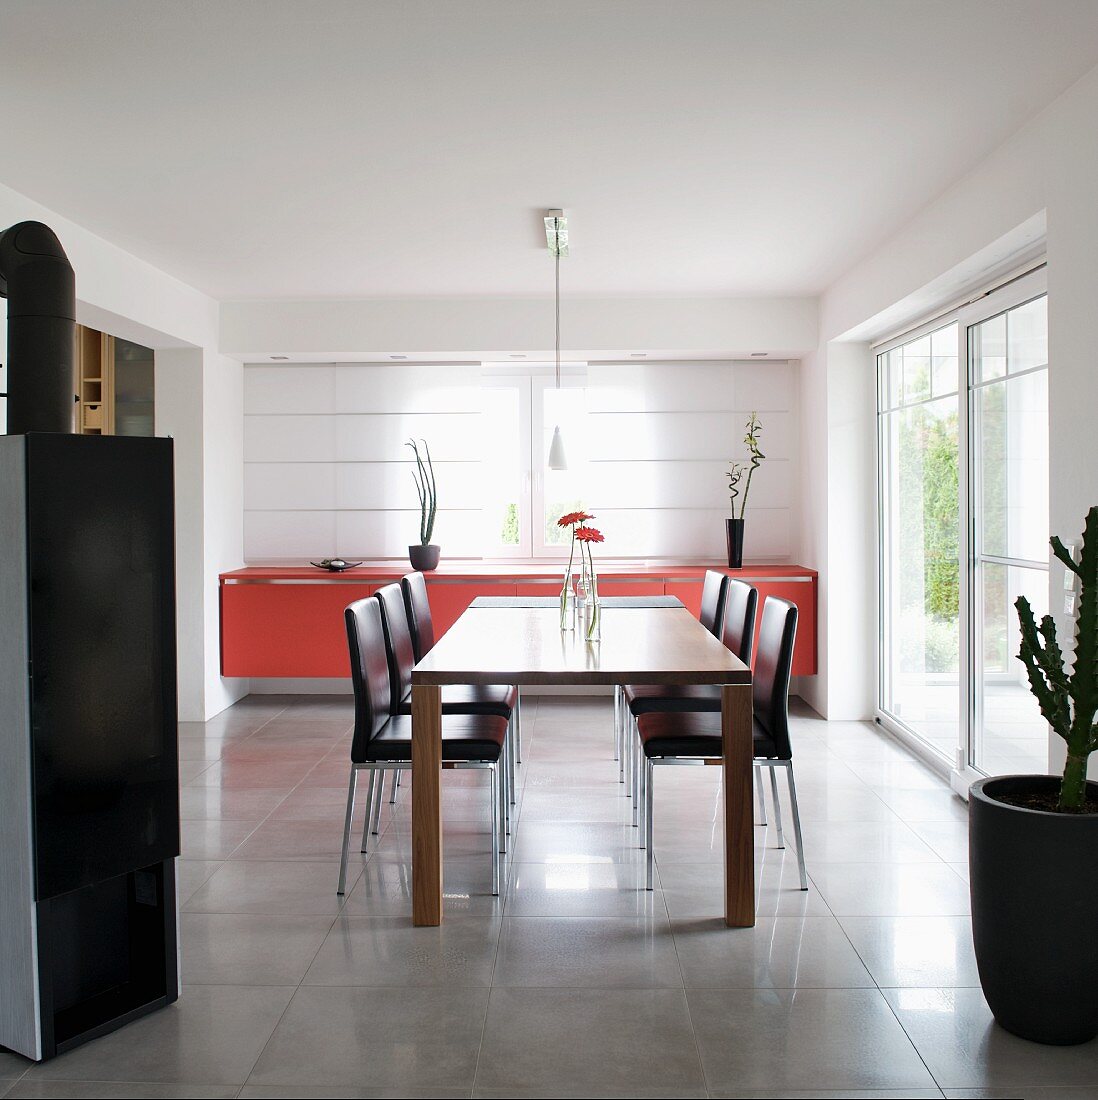 Modern dining table and leather-covered chairs in front of red sideboard against closed panel curtains on windows